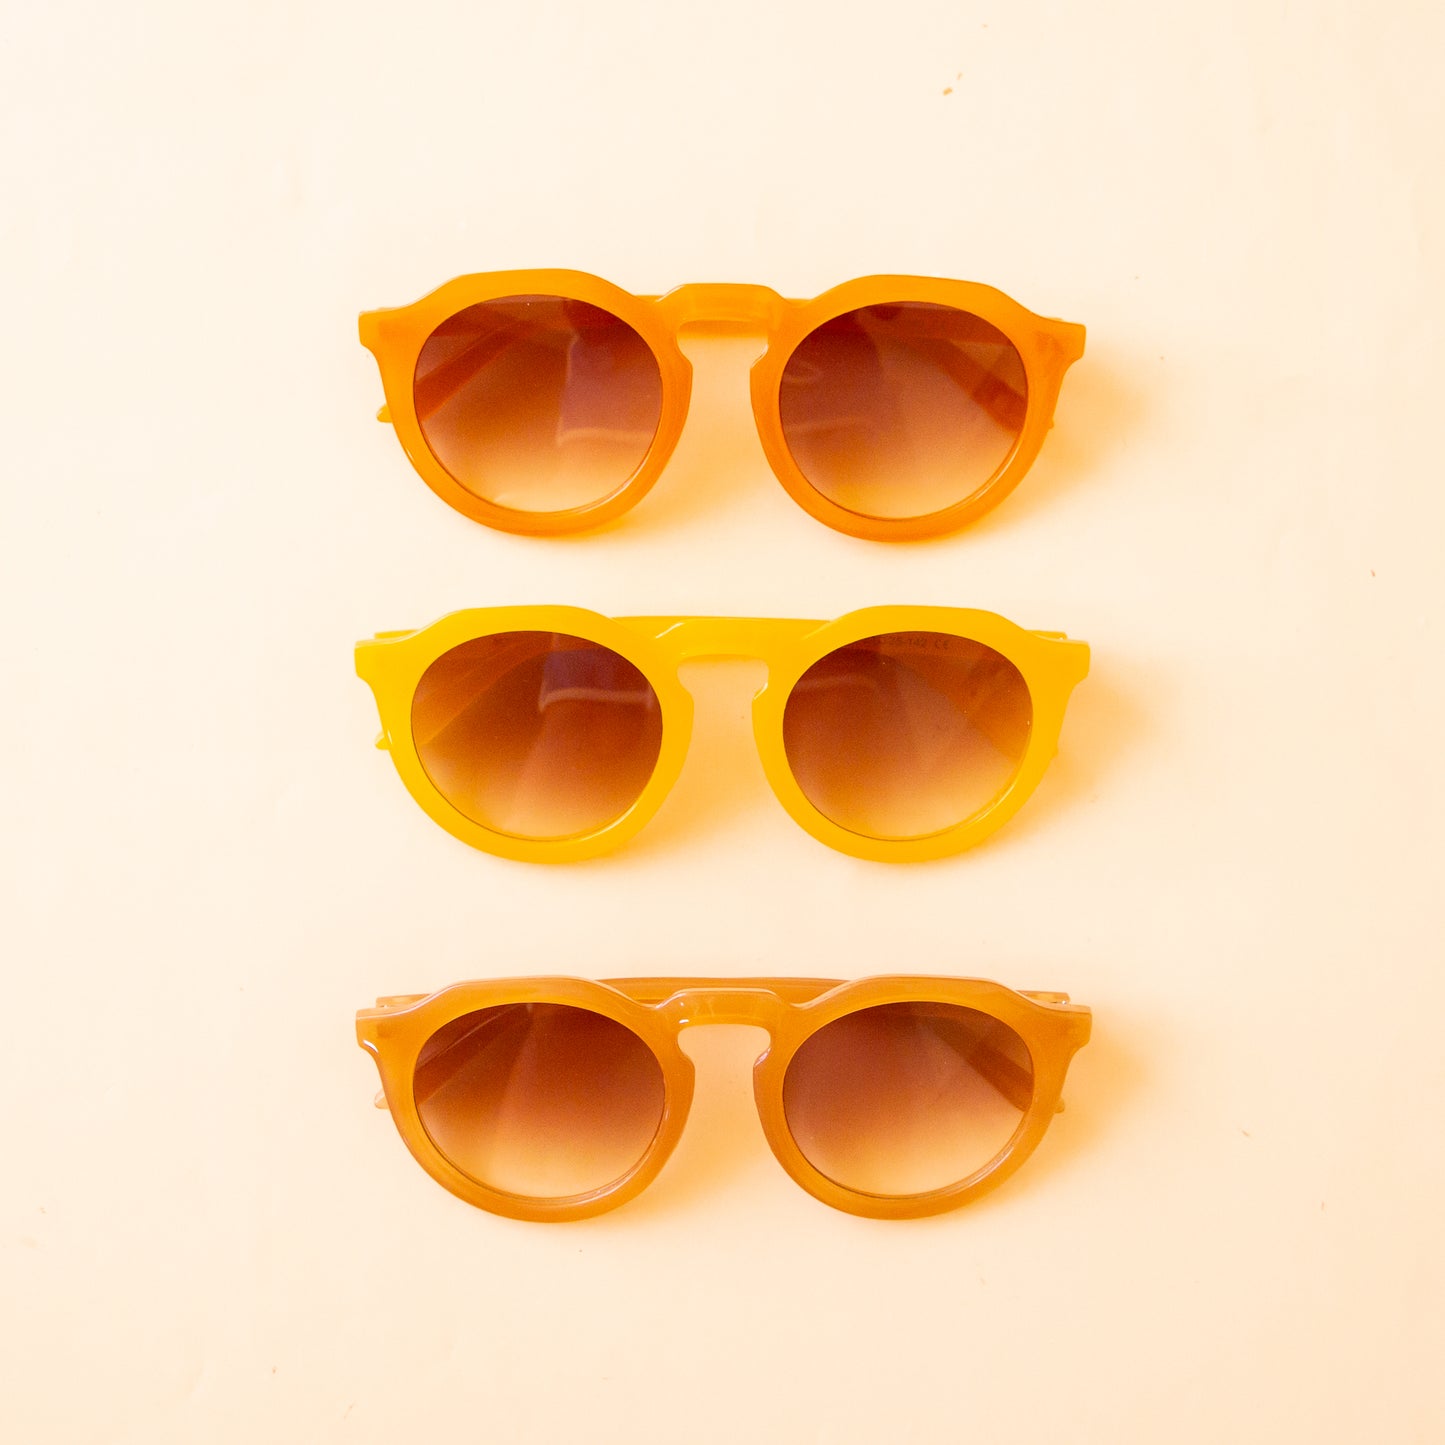 All three color ways of our Sloane sunglasses that range from orange, to yellow to warm brown. 